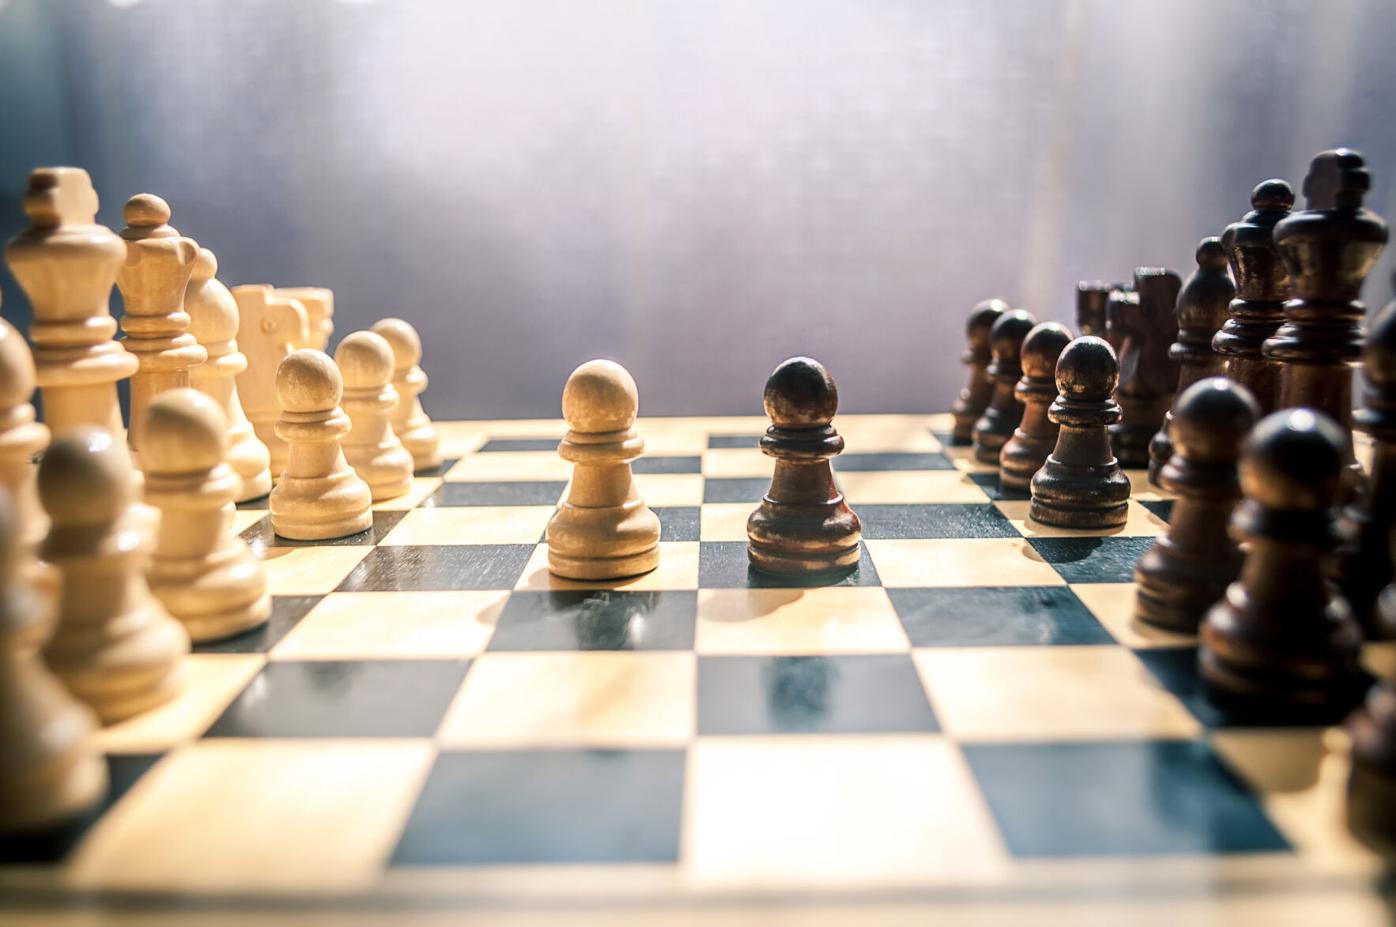 Chess.com servers struggle to keep up with demand as chess popularity surges